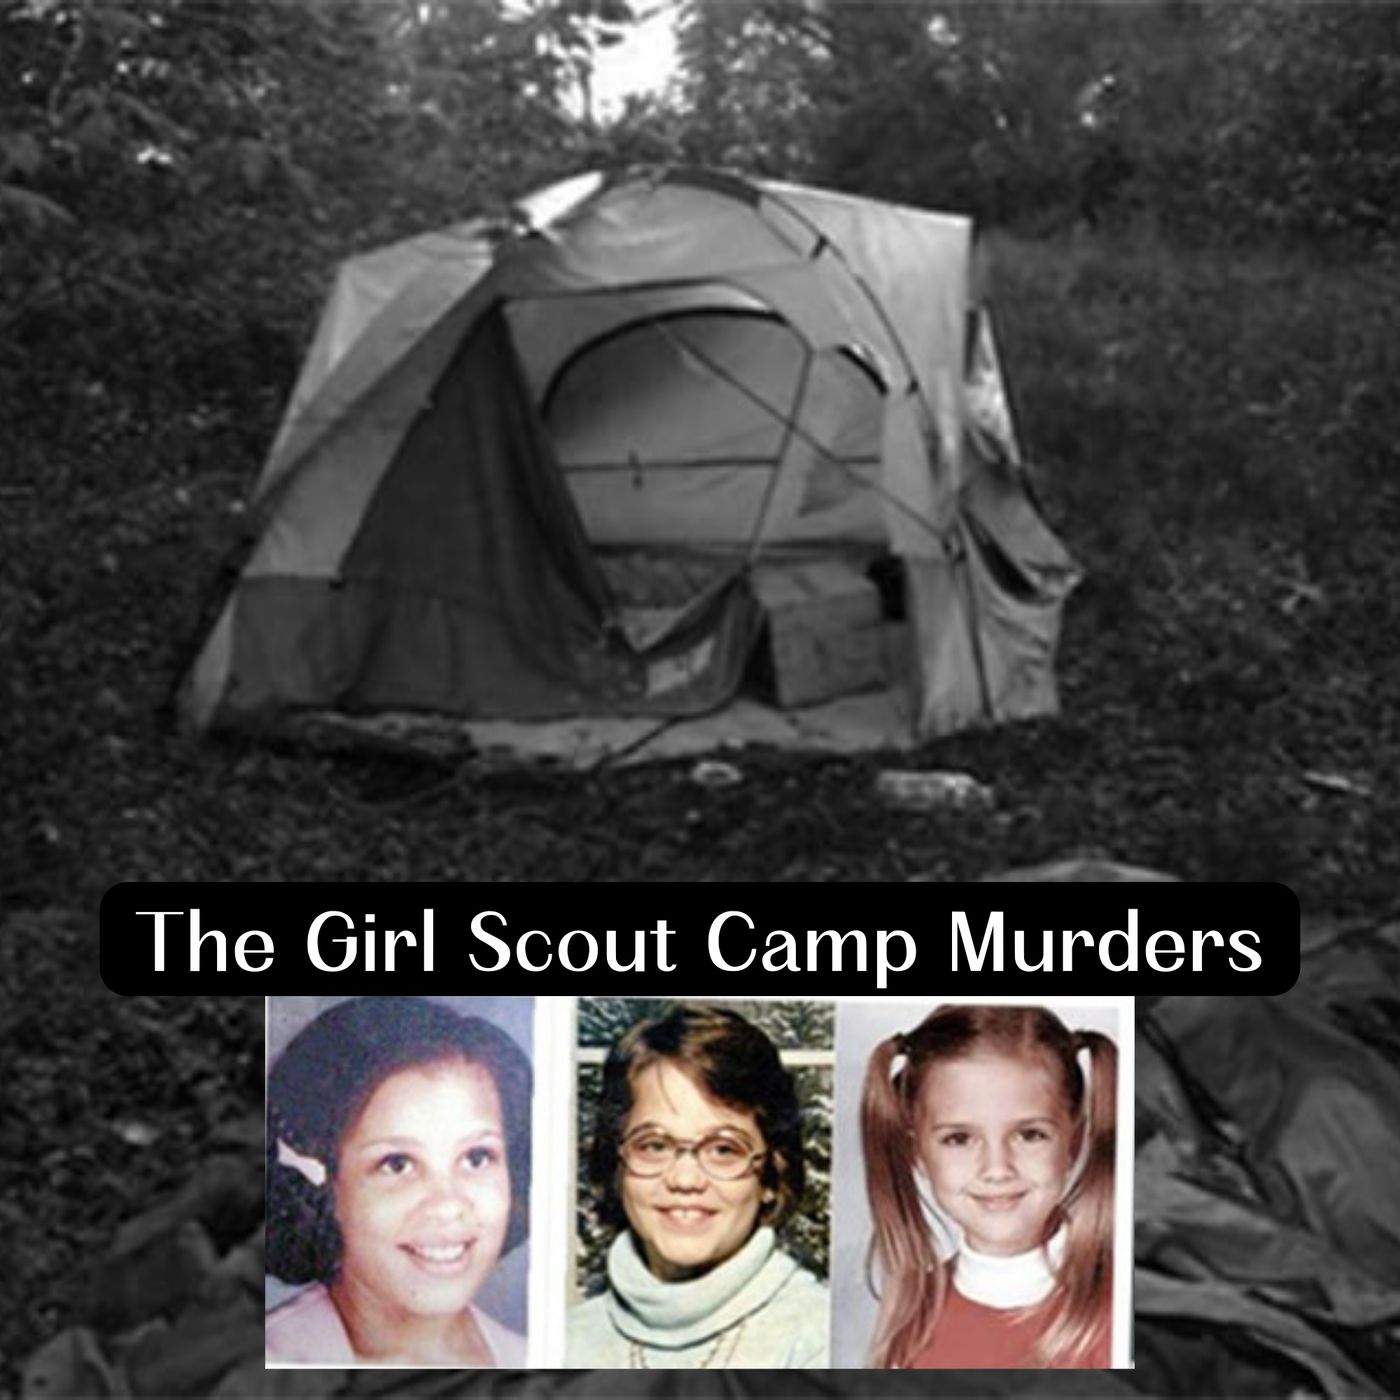 The Girl Scout Camp Murders